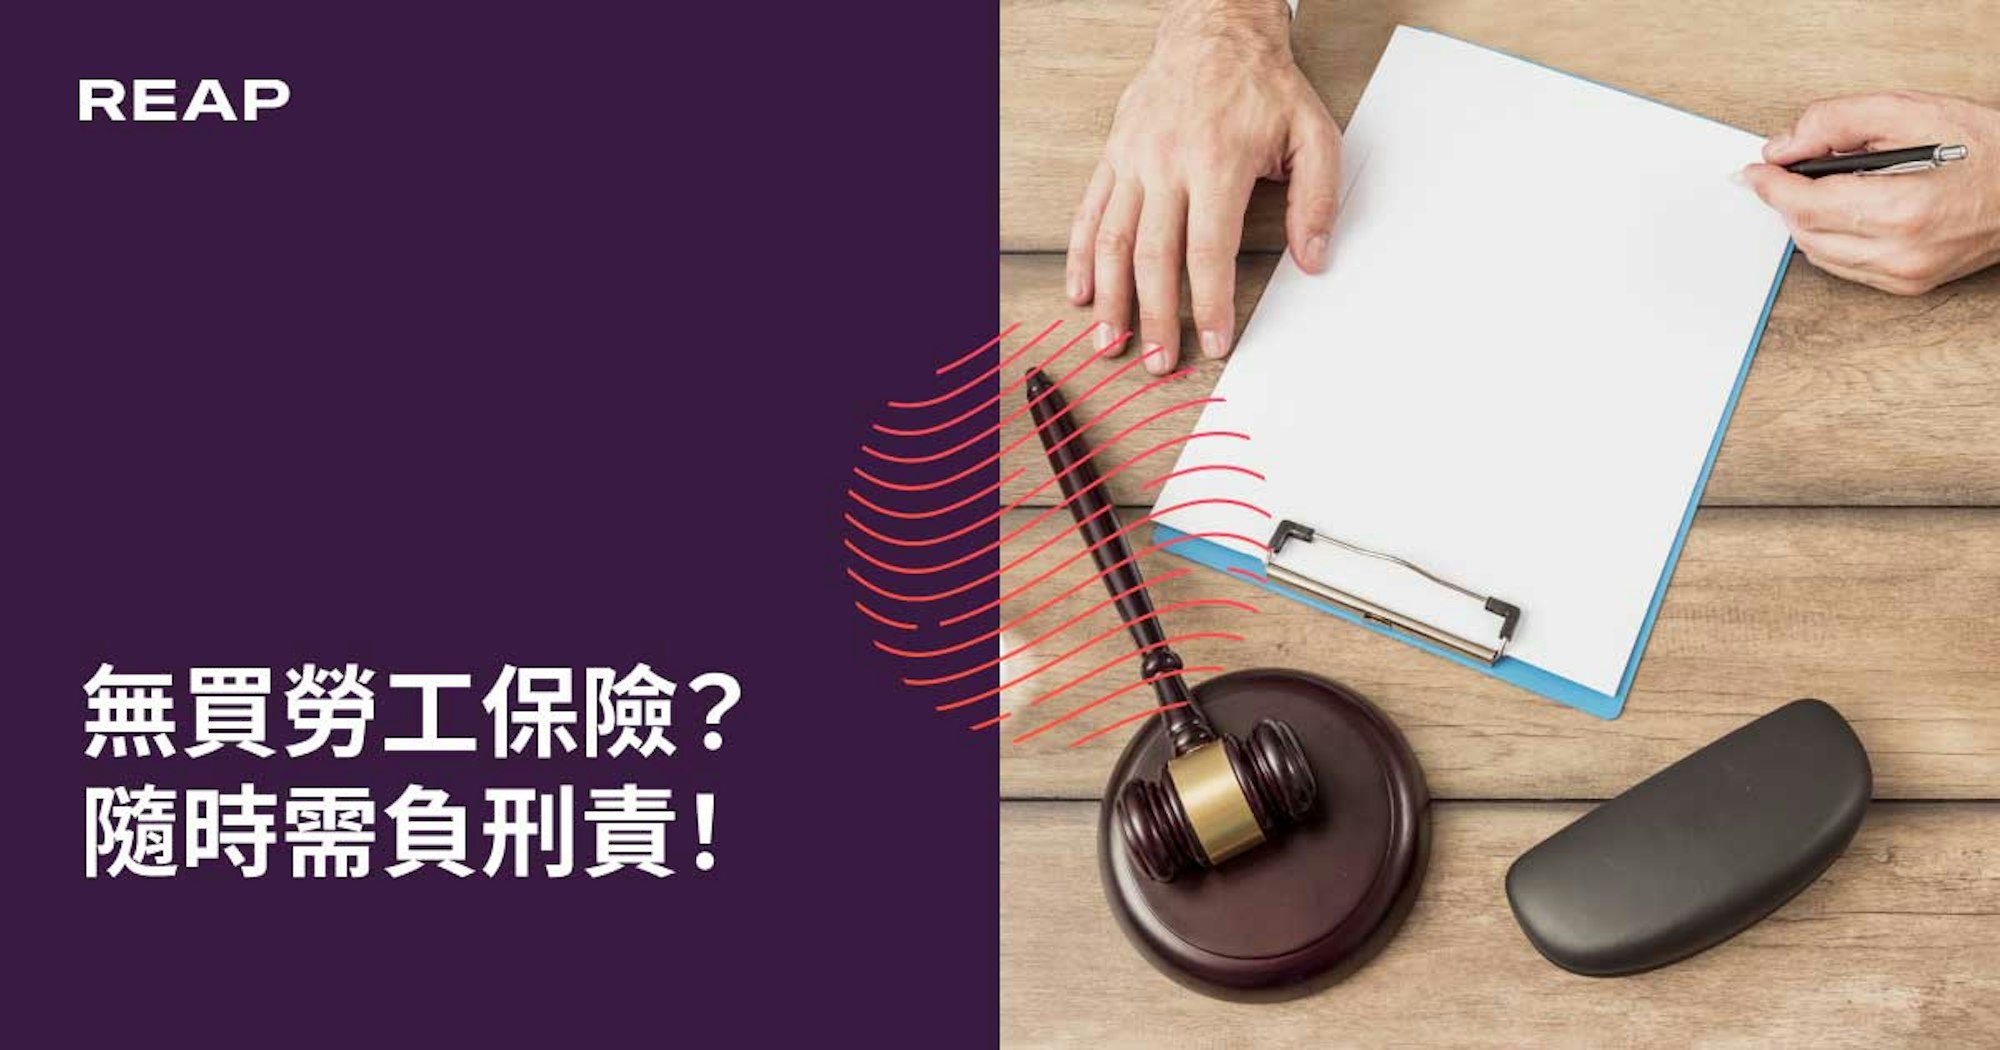 Cover Image for 無買勞工保險？隨時需負刑責！